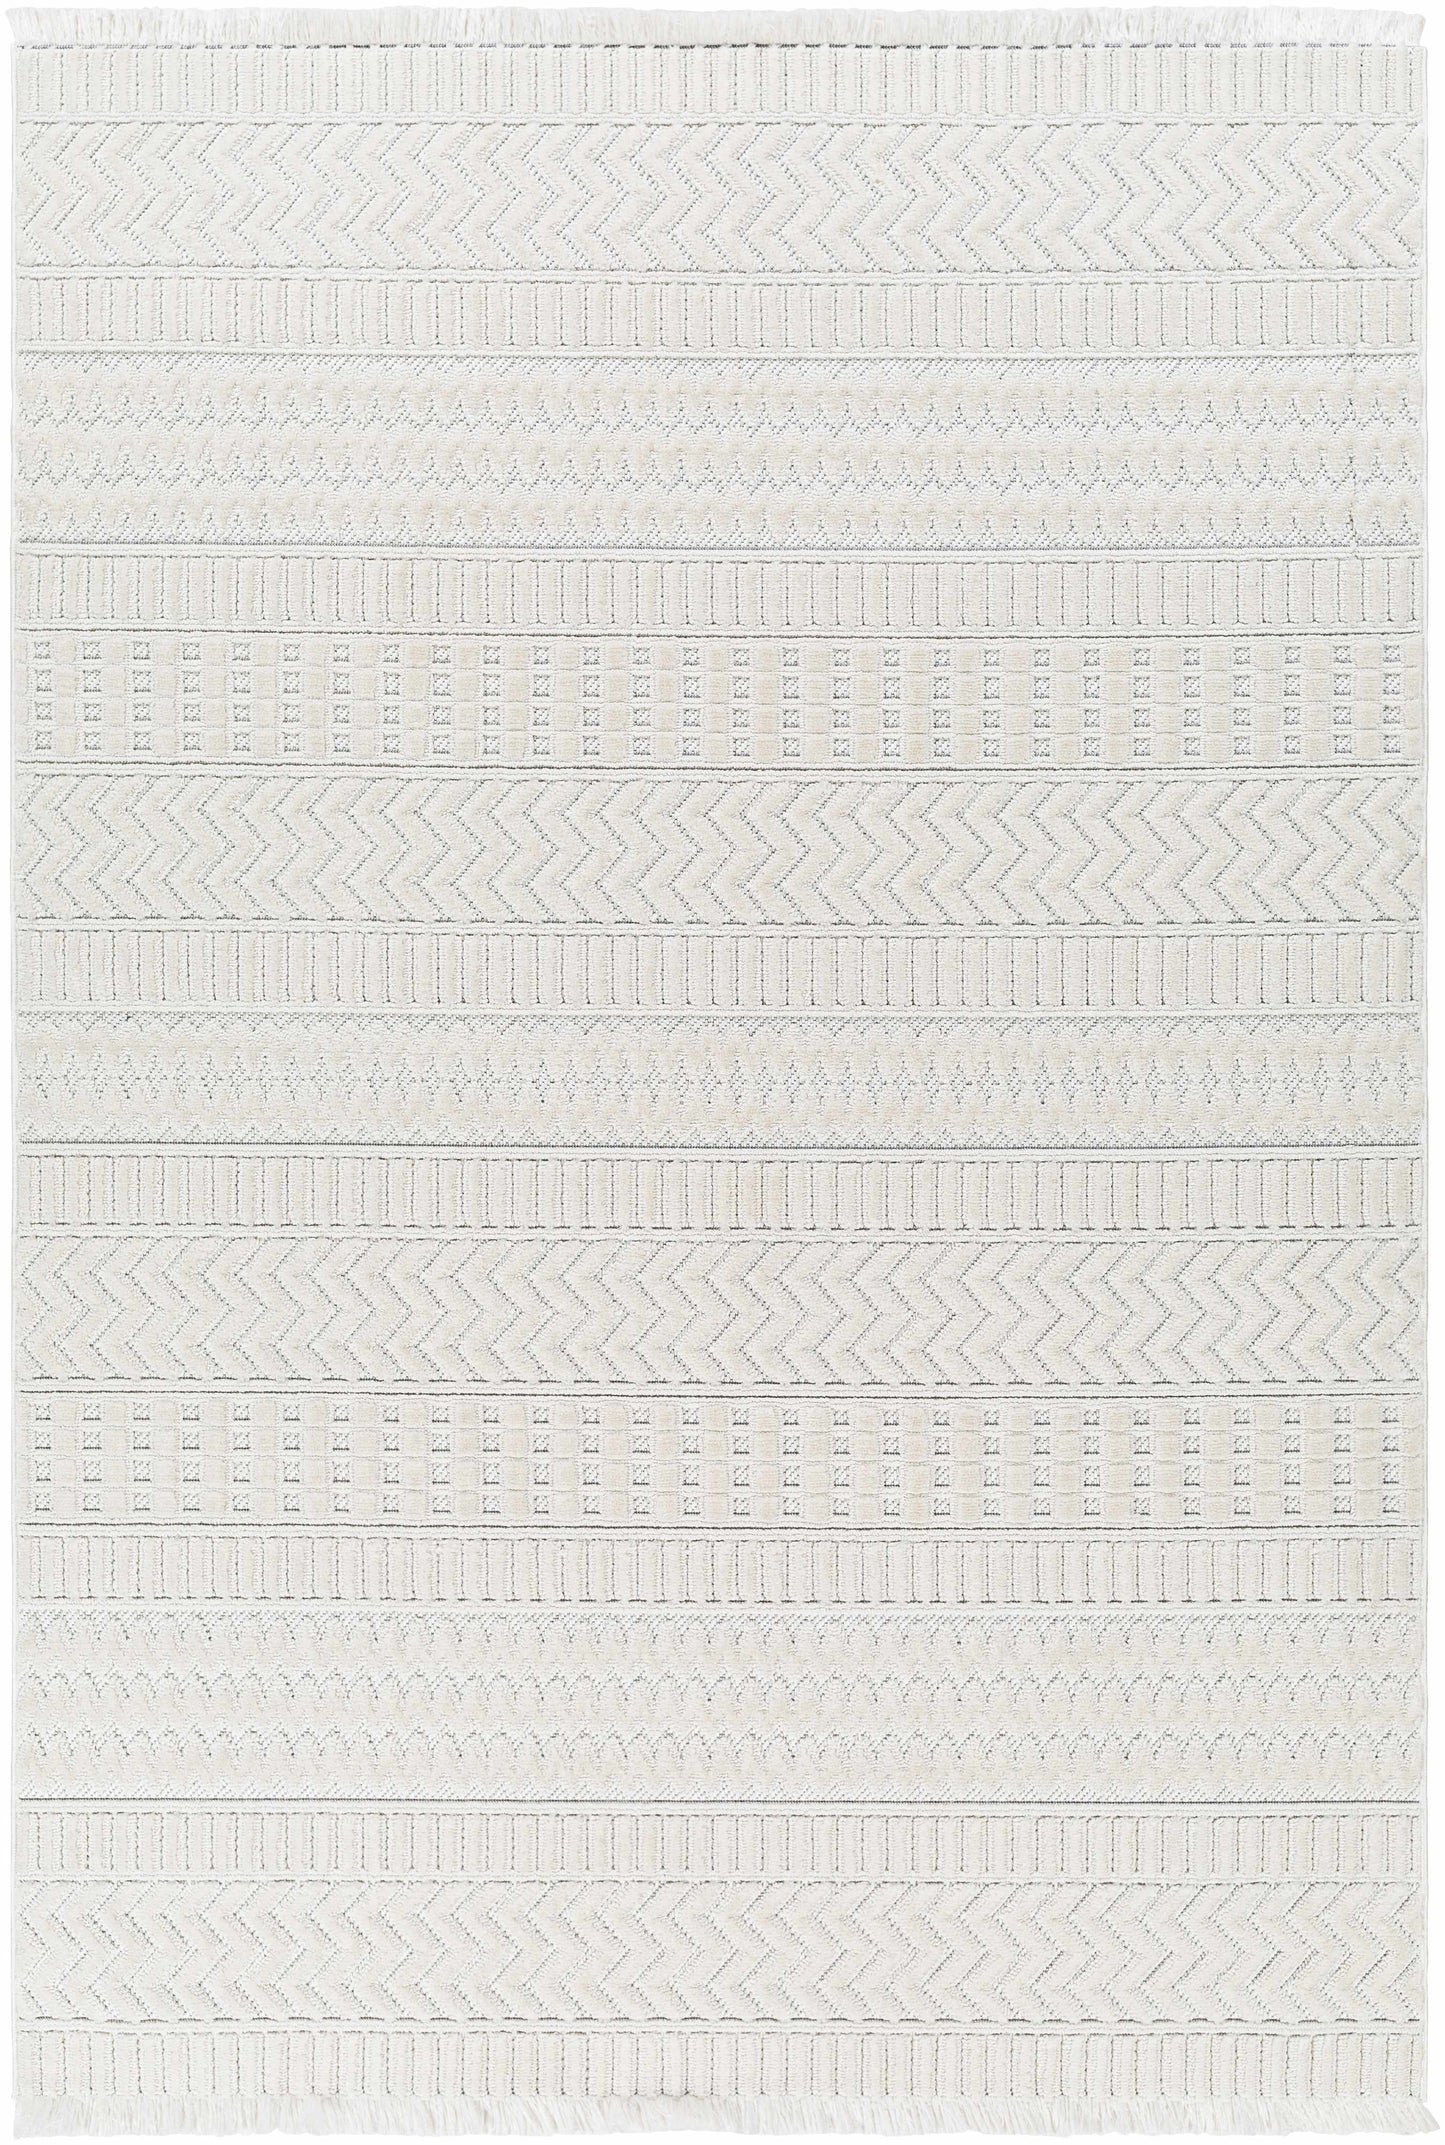 Cira Ivory Textured Area Rug with Fringes.